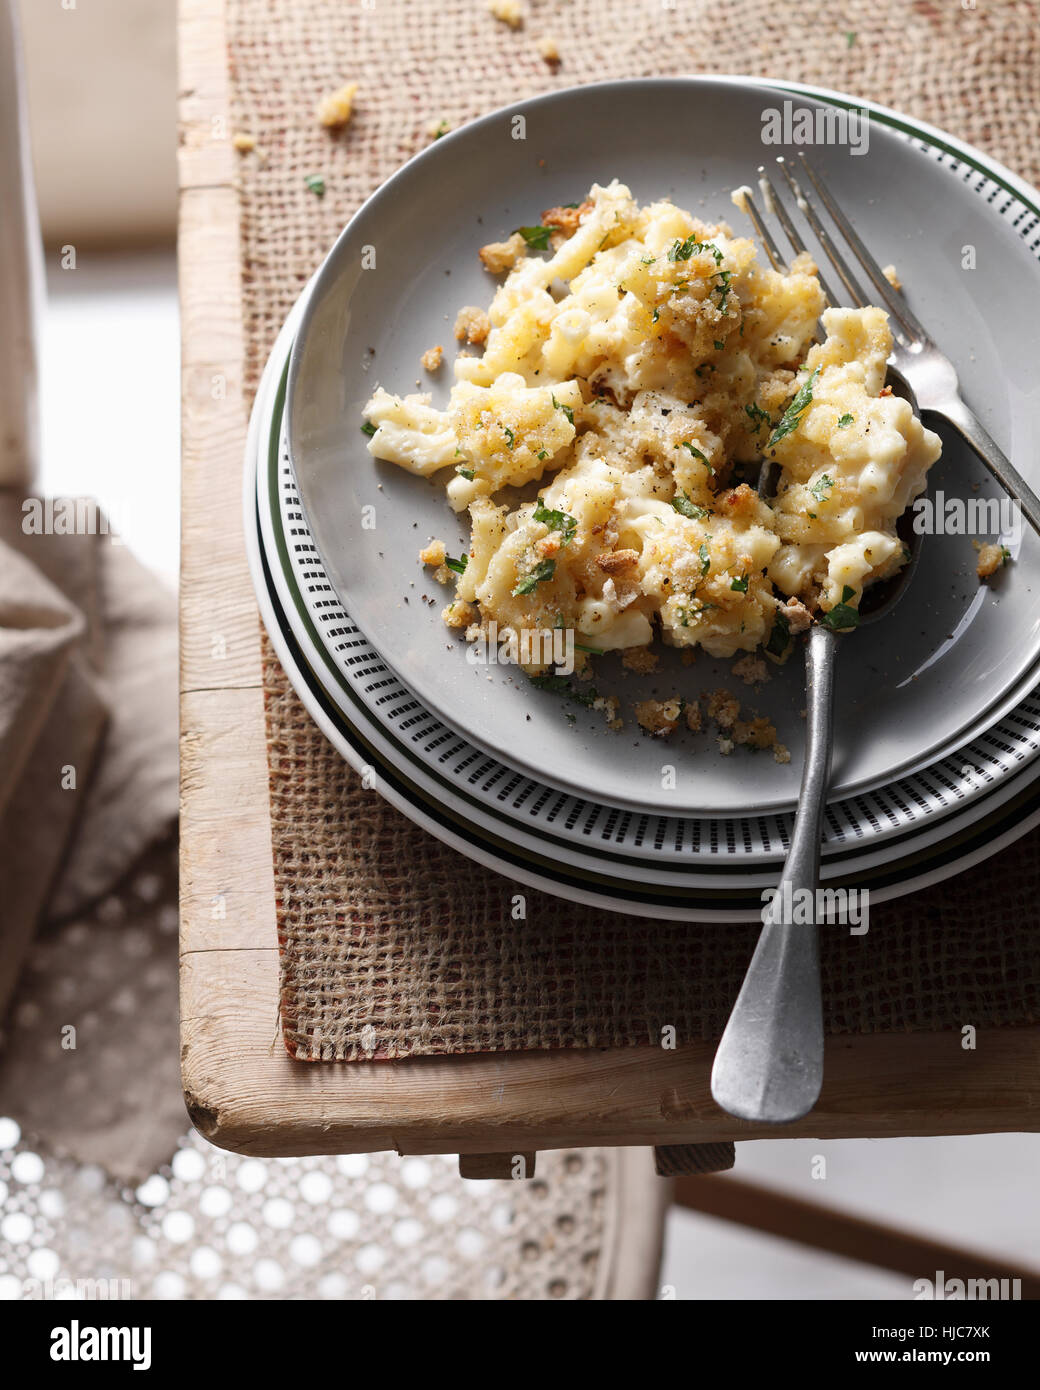 Bistro table with stacked plates and macaroni cheese Stock Photo